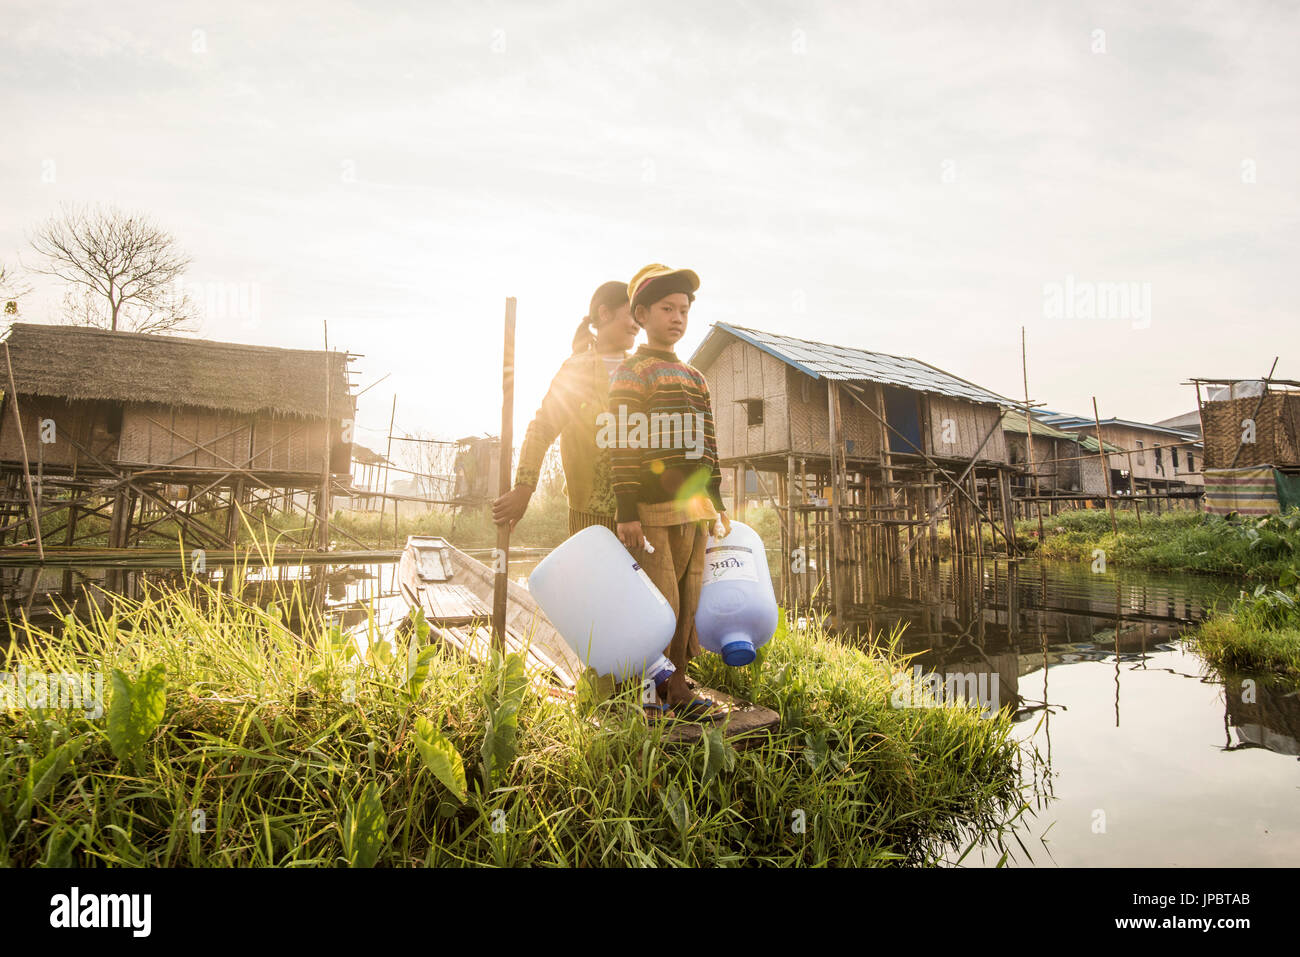 Inle lake, Nyaungshwe township, Taunggyi district, Myanmar (Burma). Girl and a child on a boat between the floating houses on the lake. Stock Photo